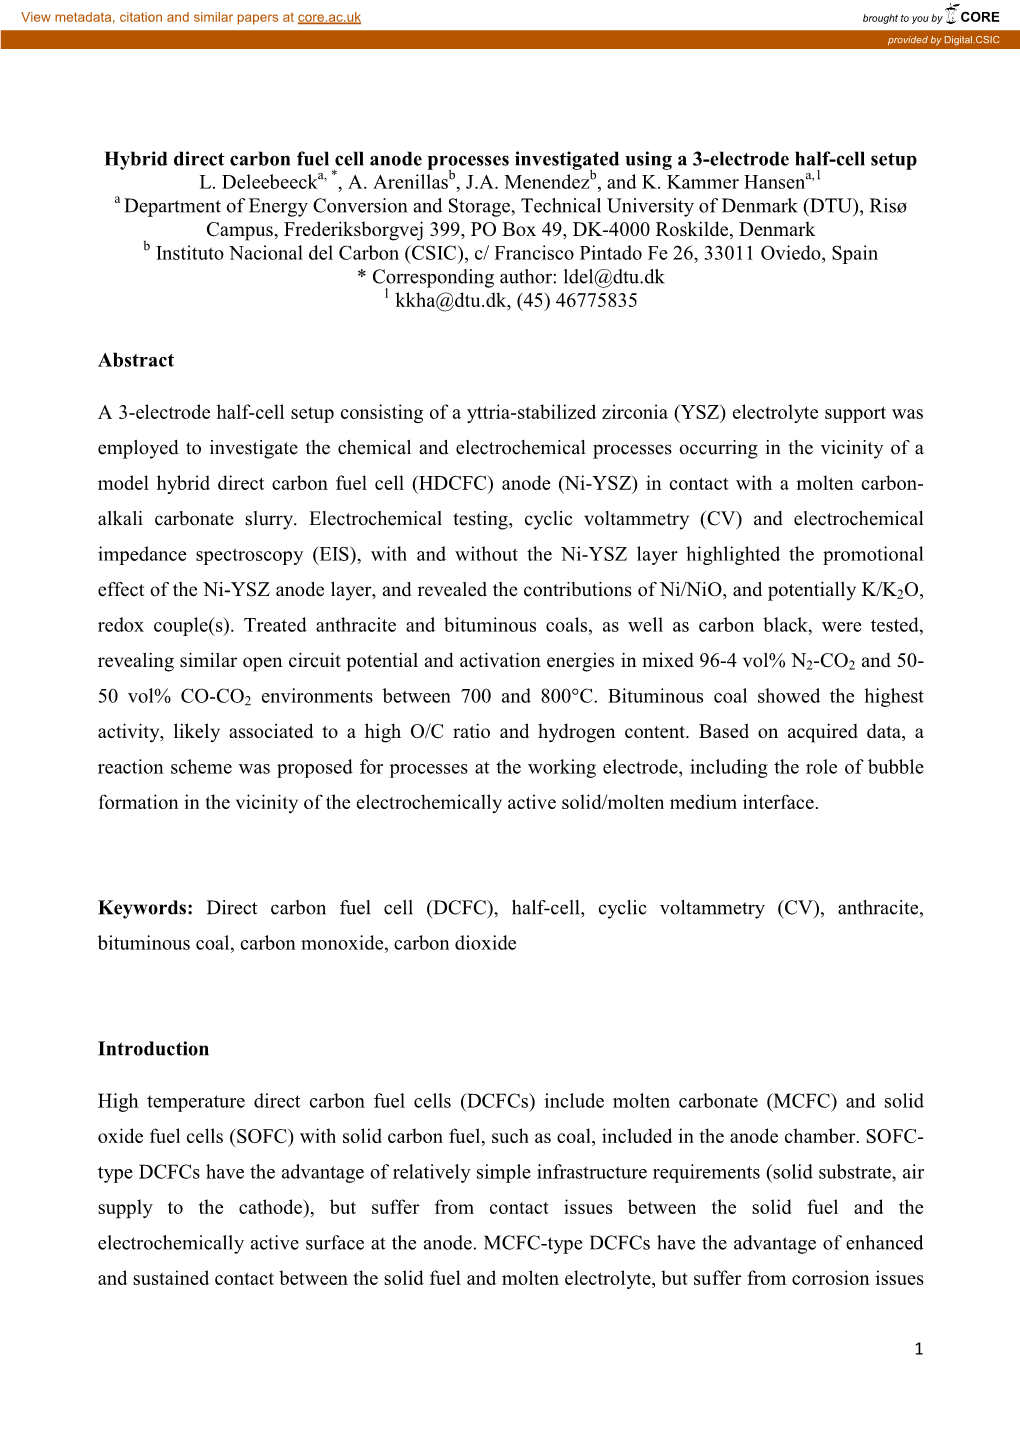 Hybrid Direct Carbon Fuel Cell Anode Processes Investigated Using a 3-Electrode Half-Cell Setup L. Deleebeecka, *, A. Arenillasb